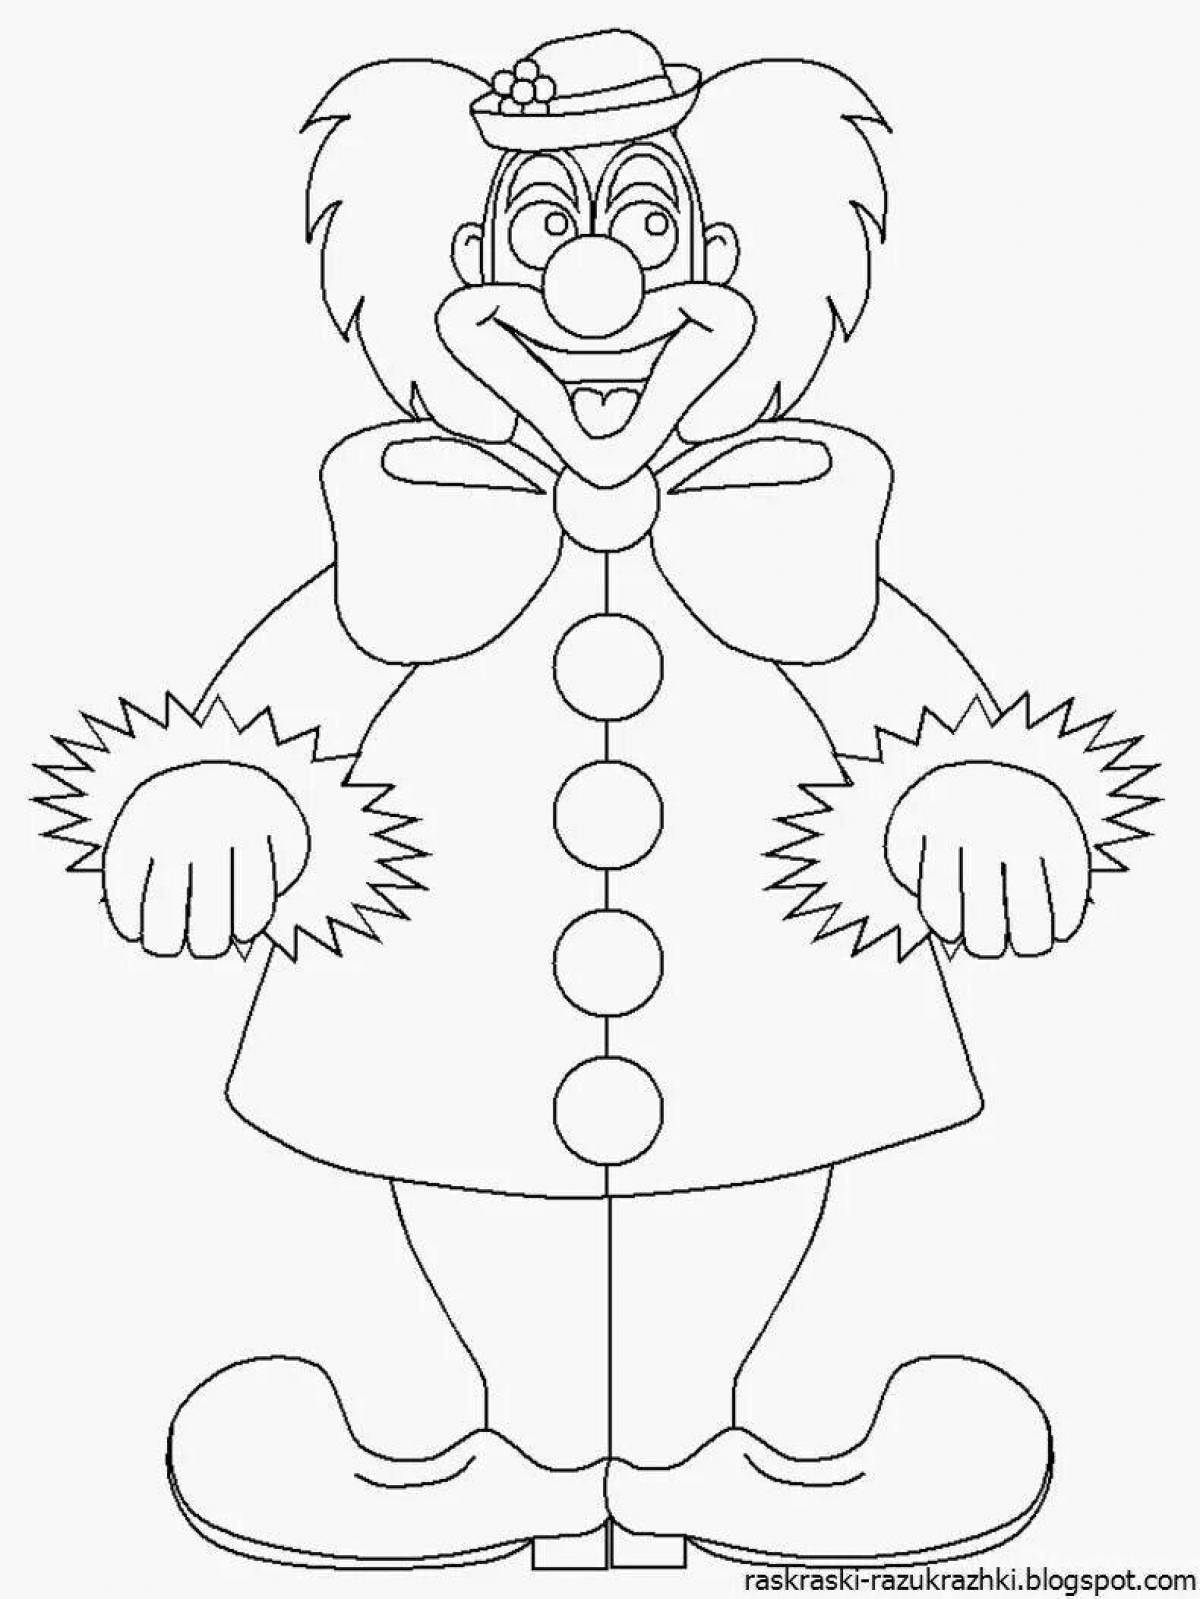 Colorful clown coloring book for 6-7 year olds